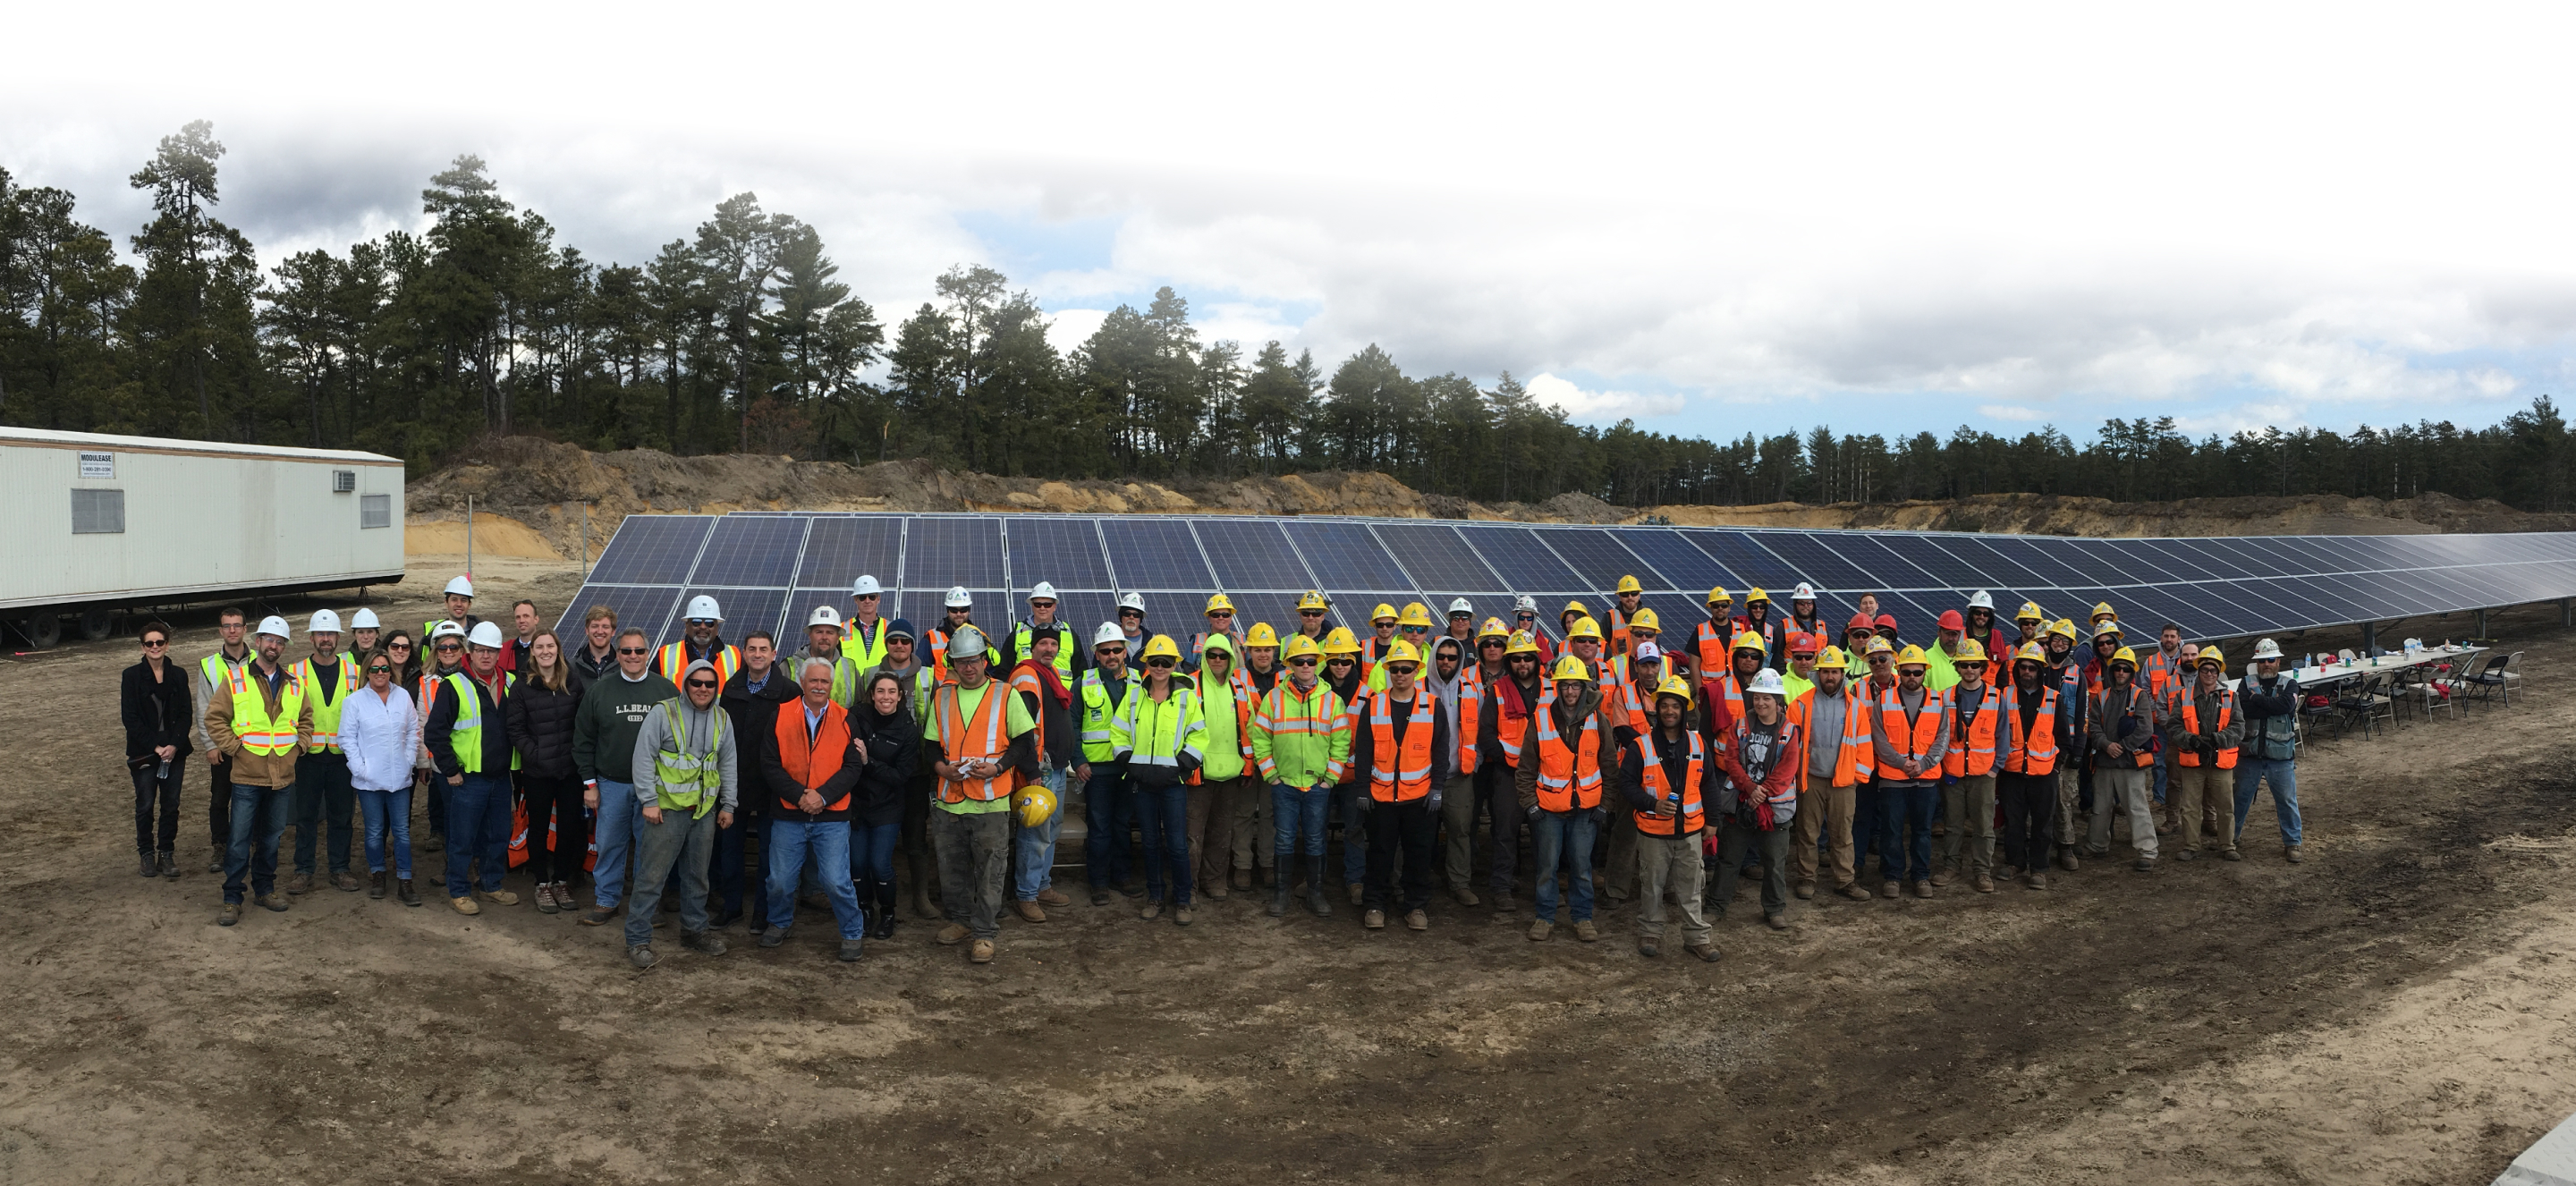 Construction team in front of solar panels.